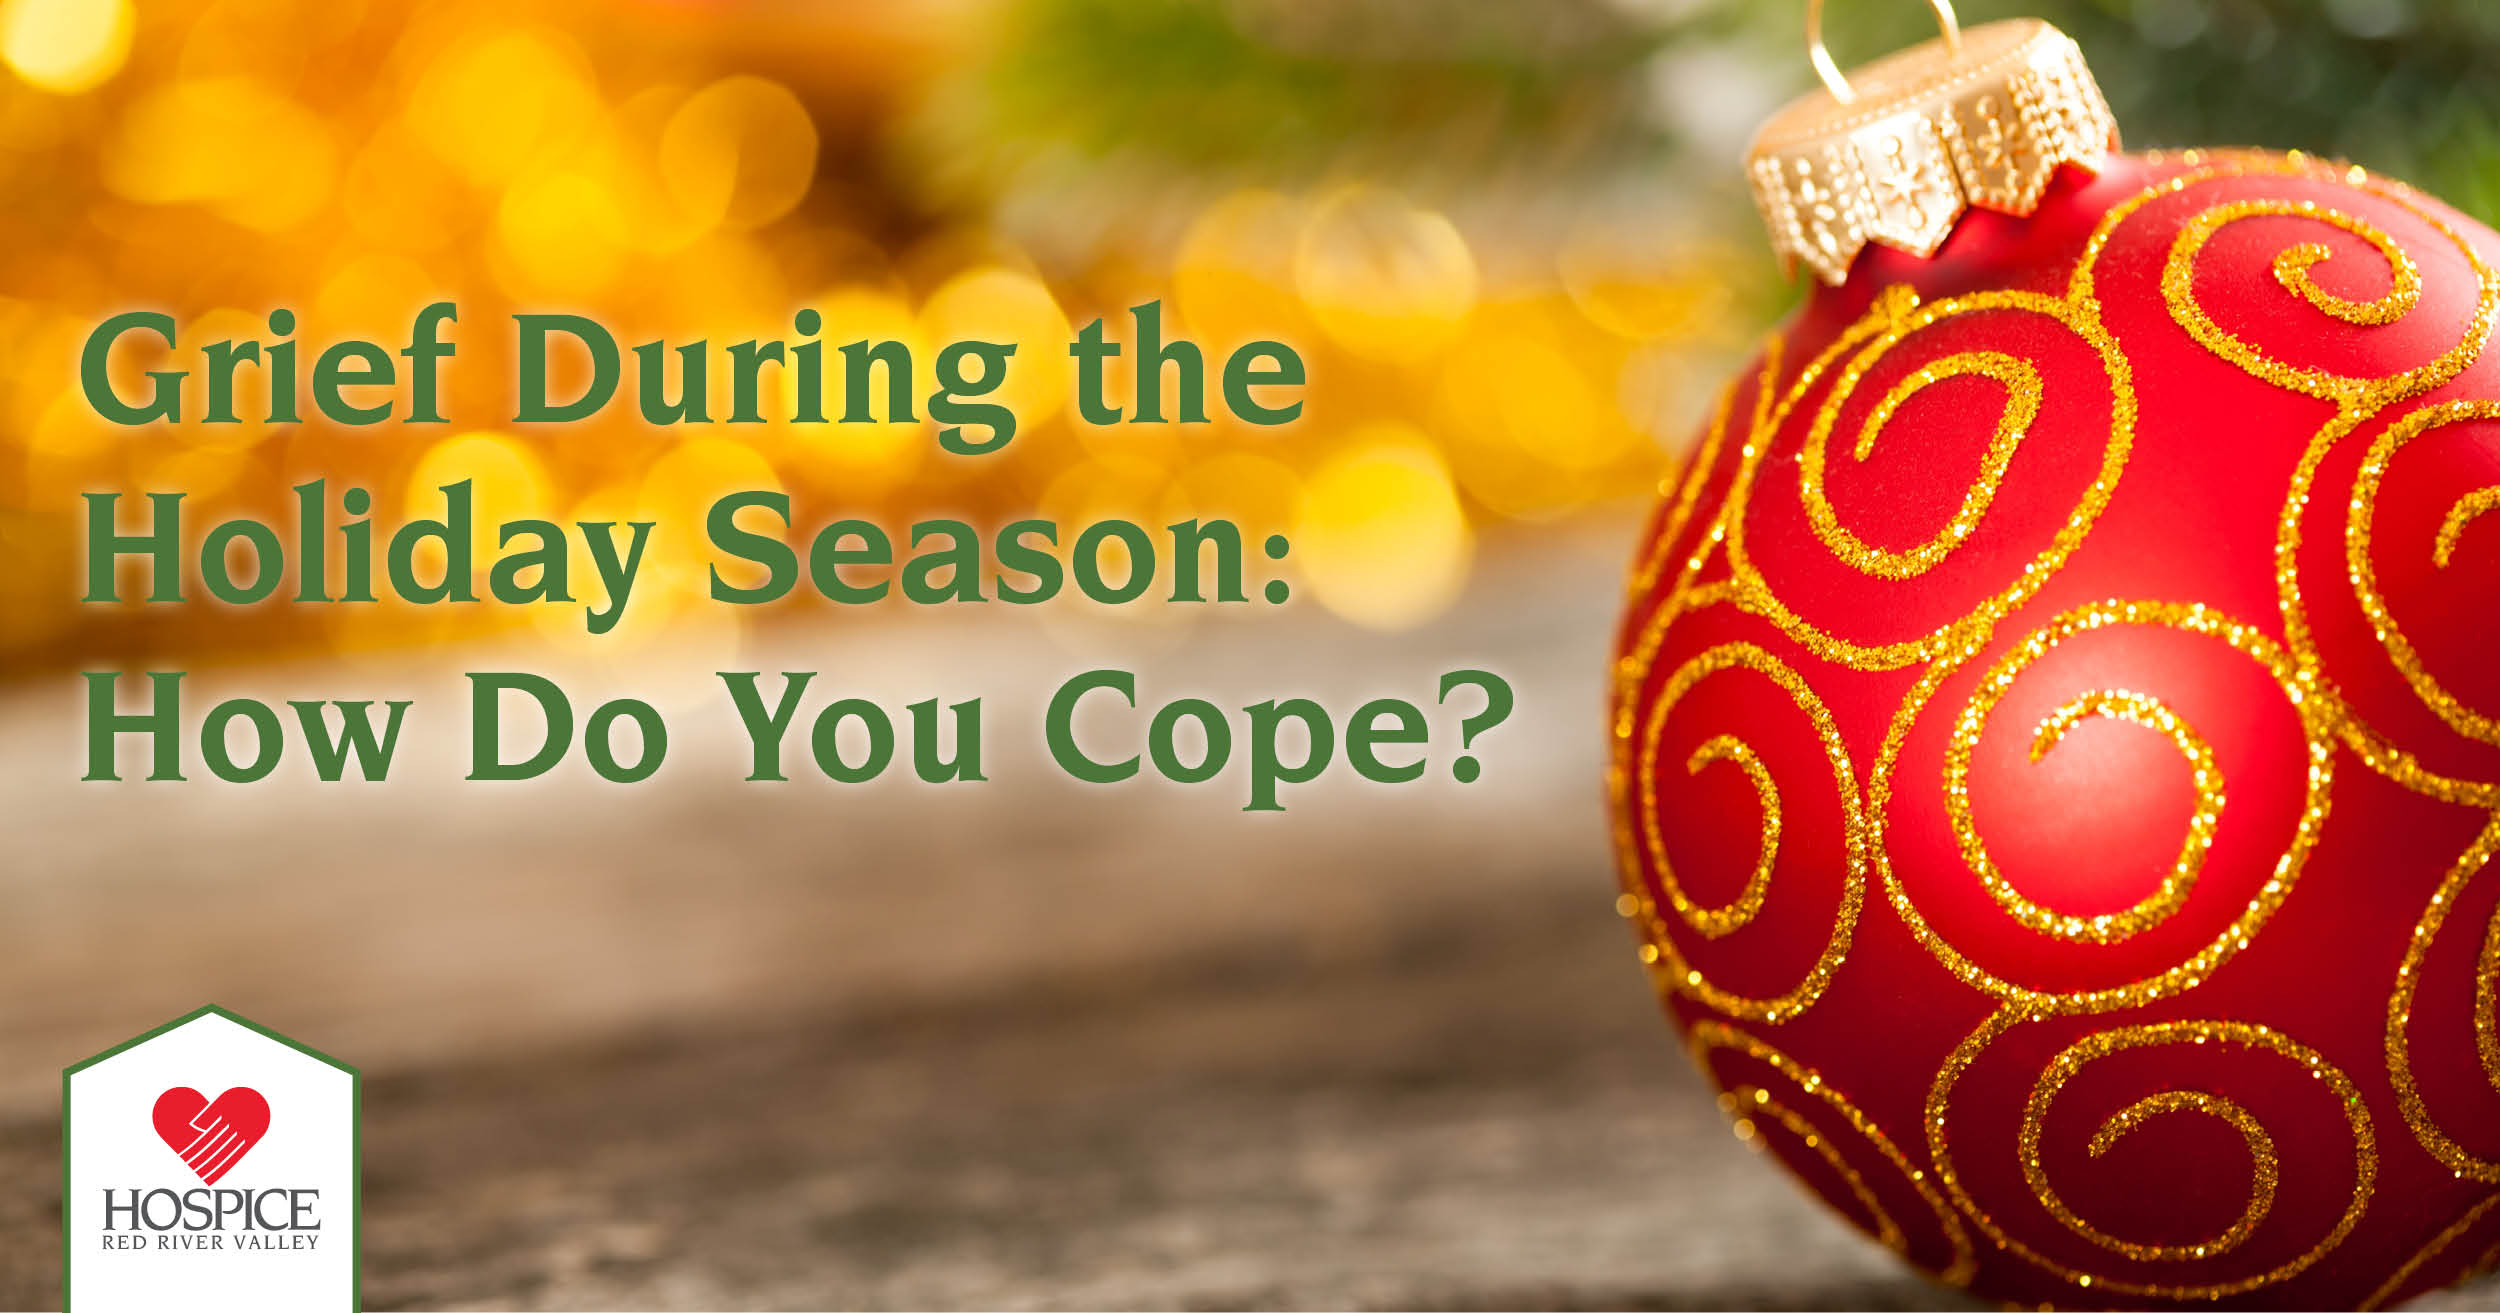 Grief During the Holiday Season How Do You Cope